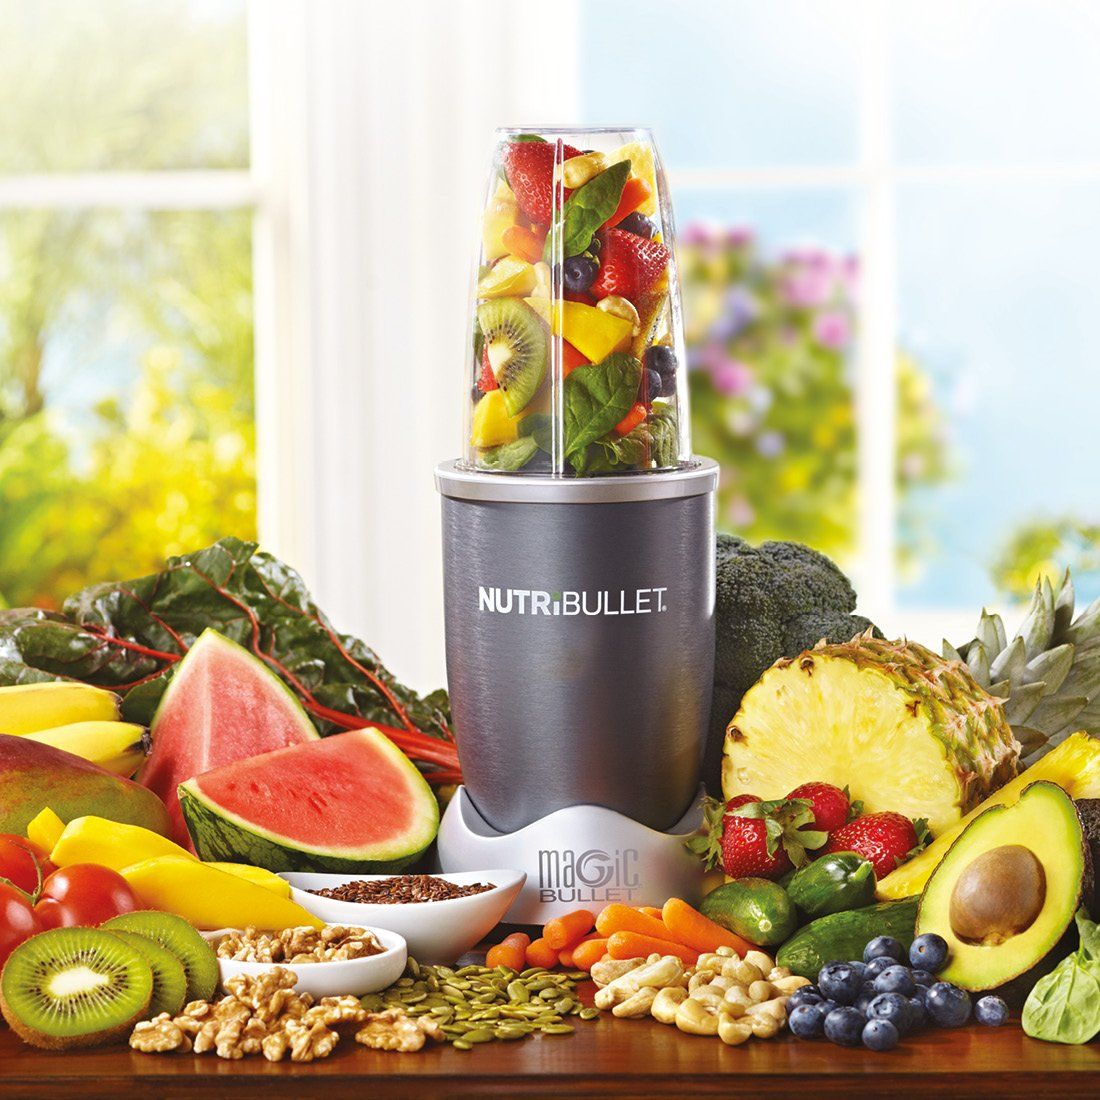 Uncovering the Truth About the NutriBullet Pro 900 - Don't Miss